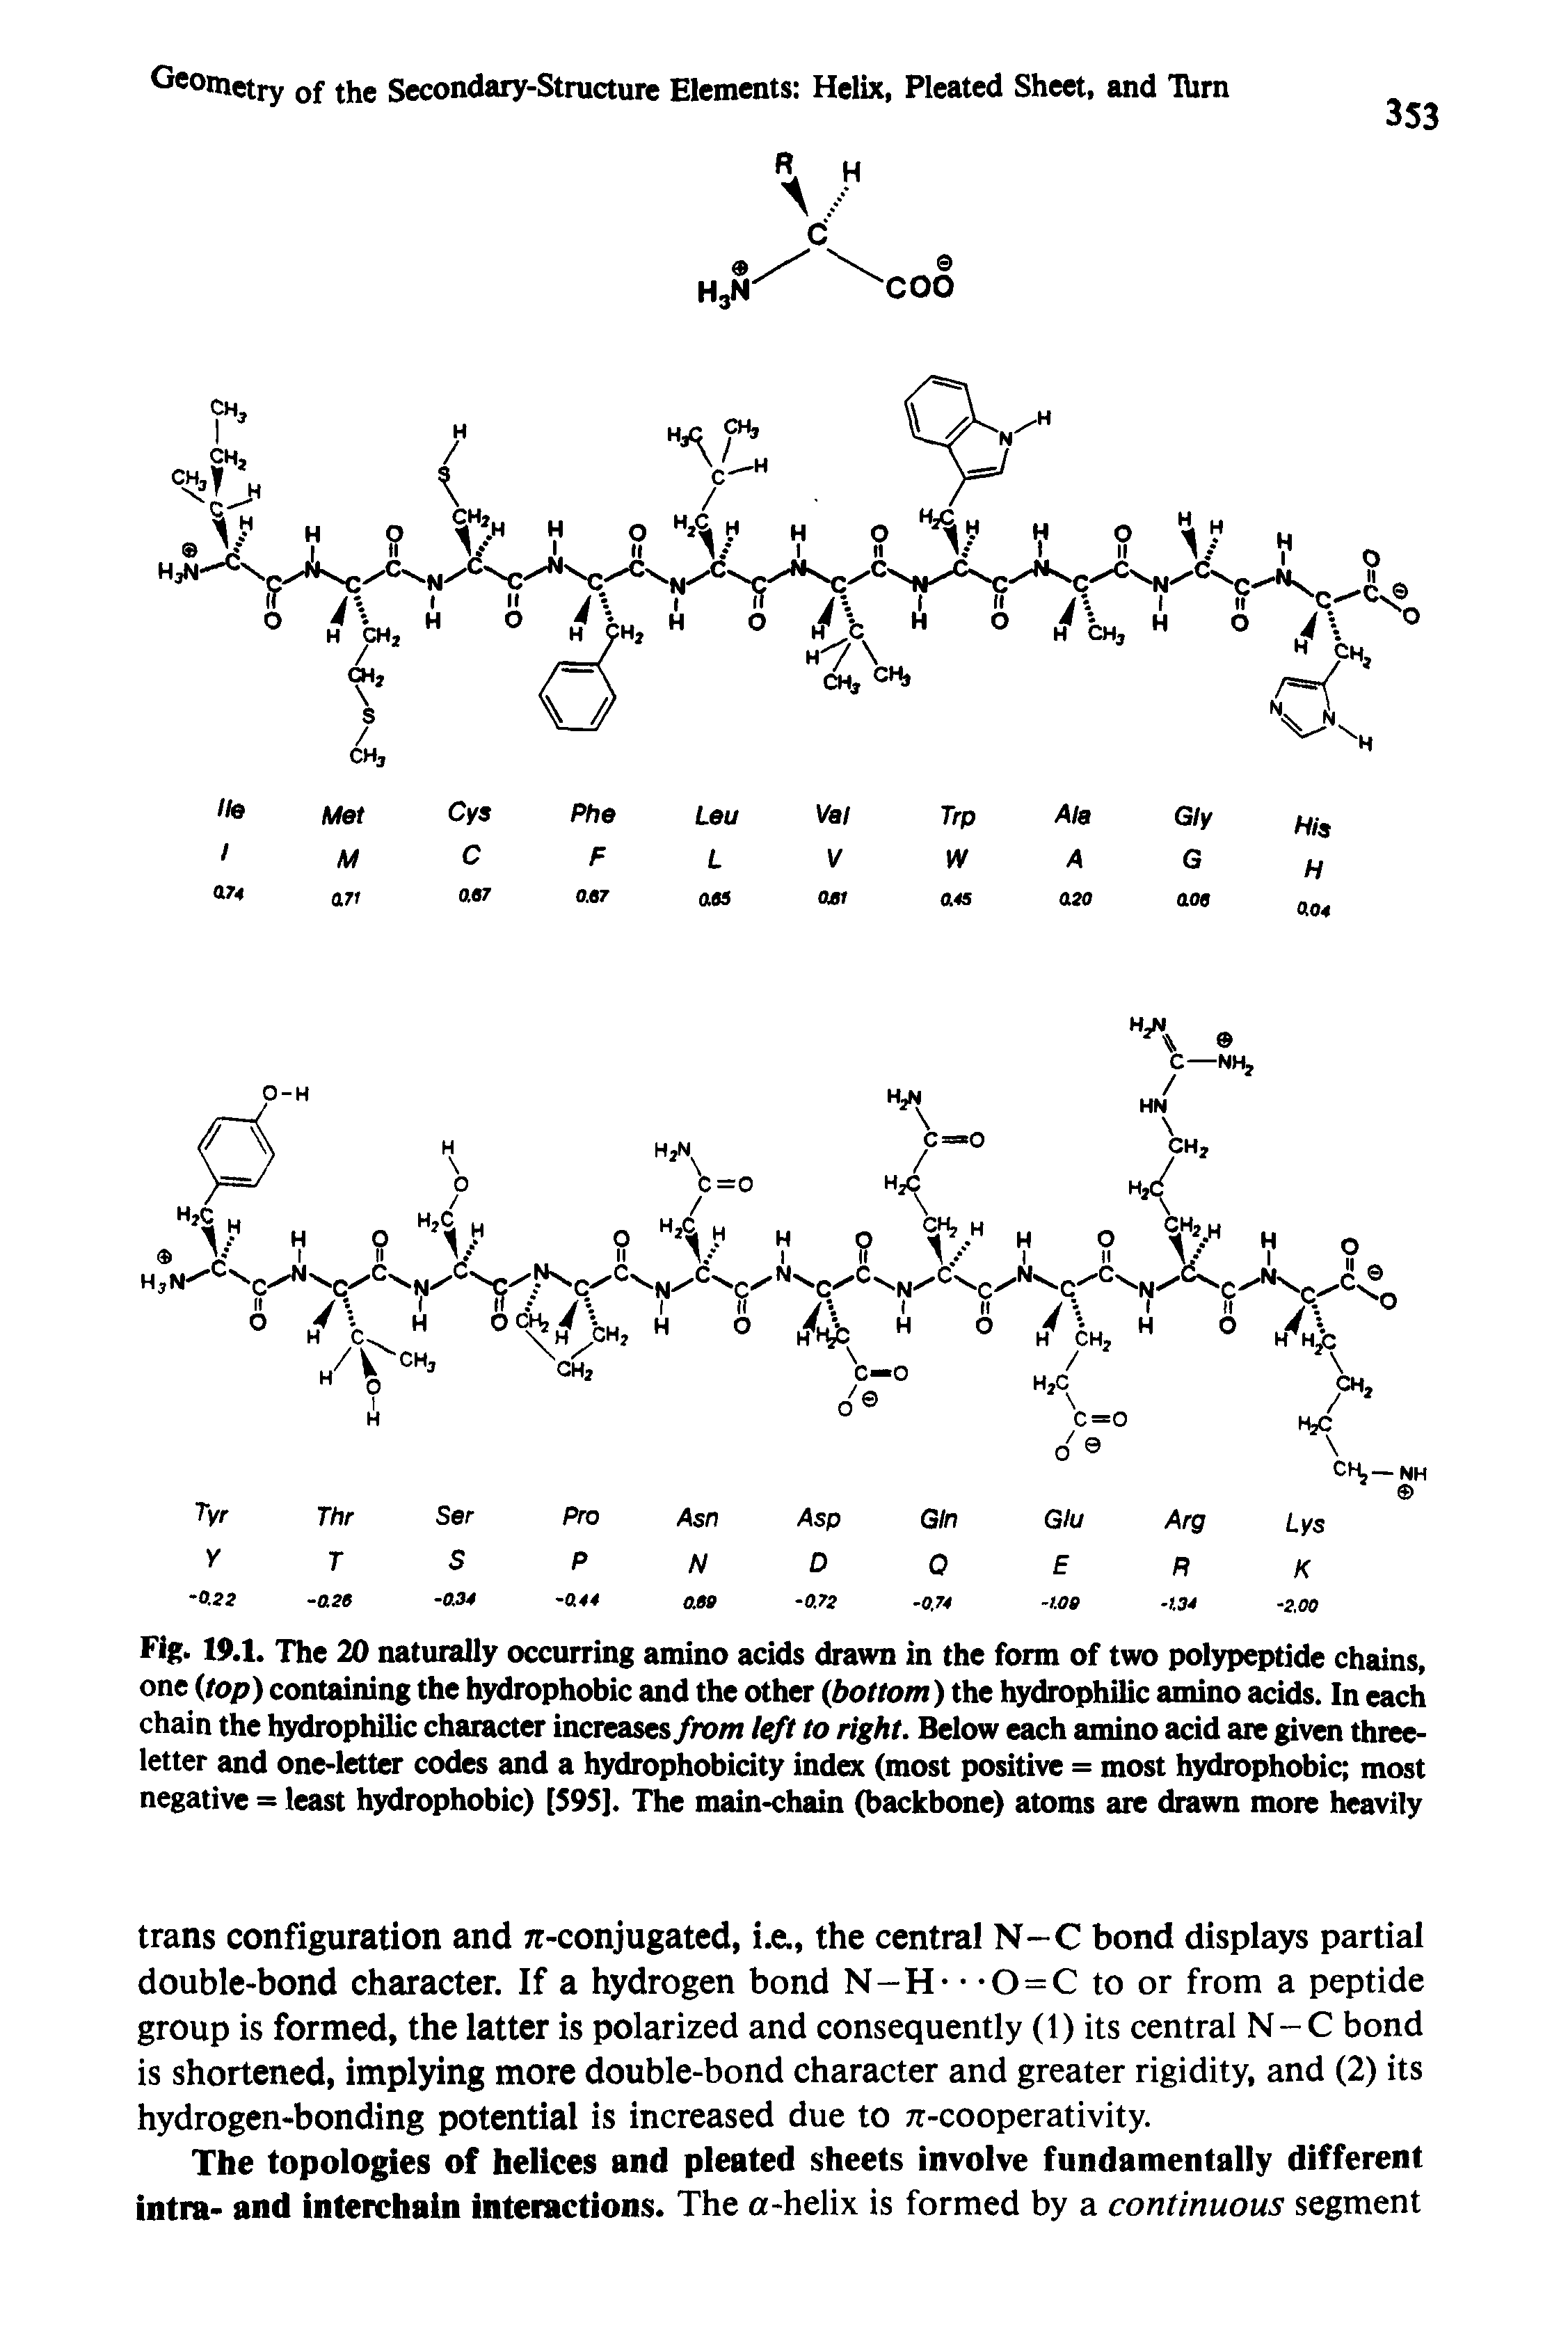 Fig. 19.1. The 20 naturally occurring amino acids drawn in the form of two polypeptide chains, one (top) containing the hydrophobic and the other (bottom) the hydrophilic amino acids. In each chain the hydrophilic character increases from left to right. Below each amino acid are given three-letter and one-letter codes and a hydrophobicity index (most positive = most hydrophobic most negative = least hydrophobic) [595]. The main-chain (backbone) atoms are drawn more heavily...